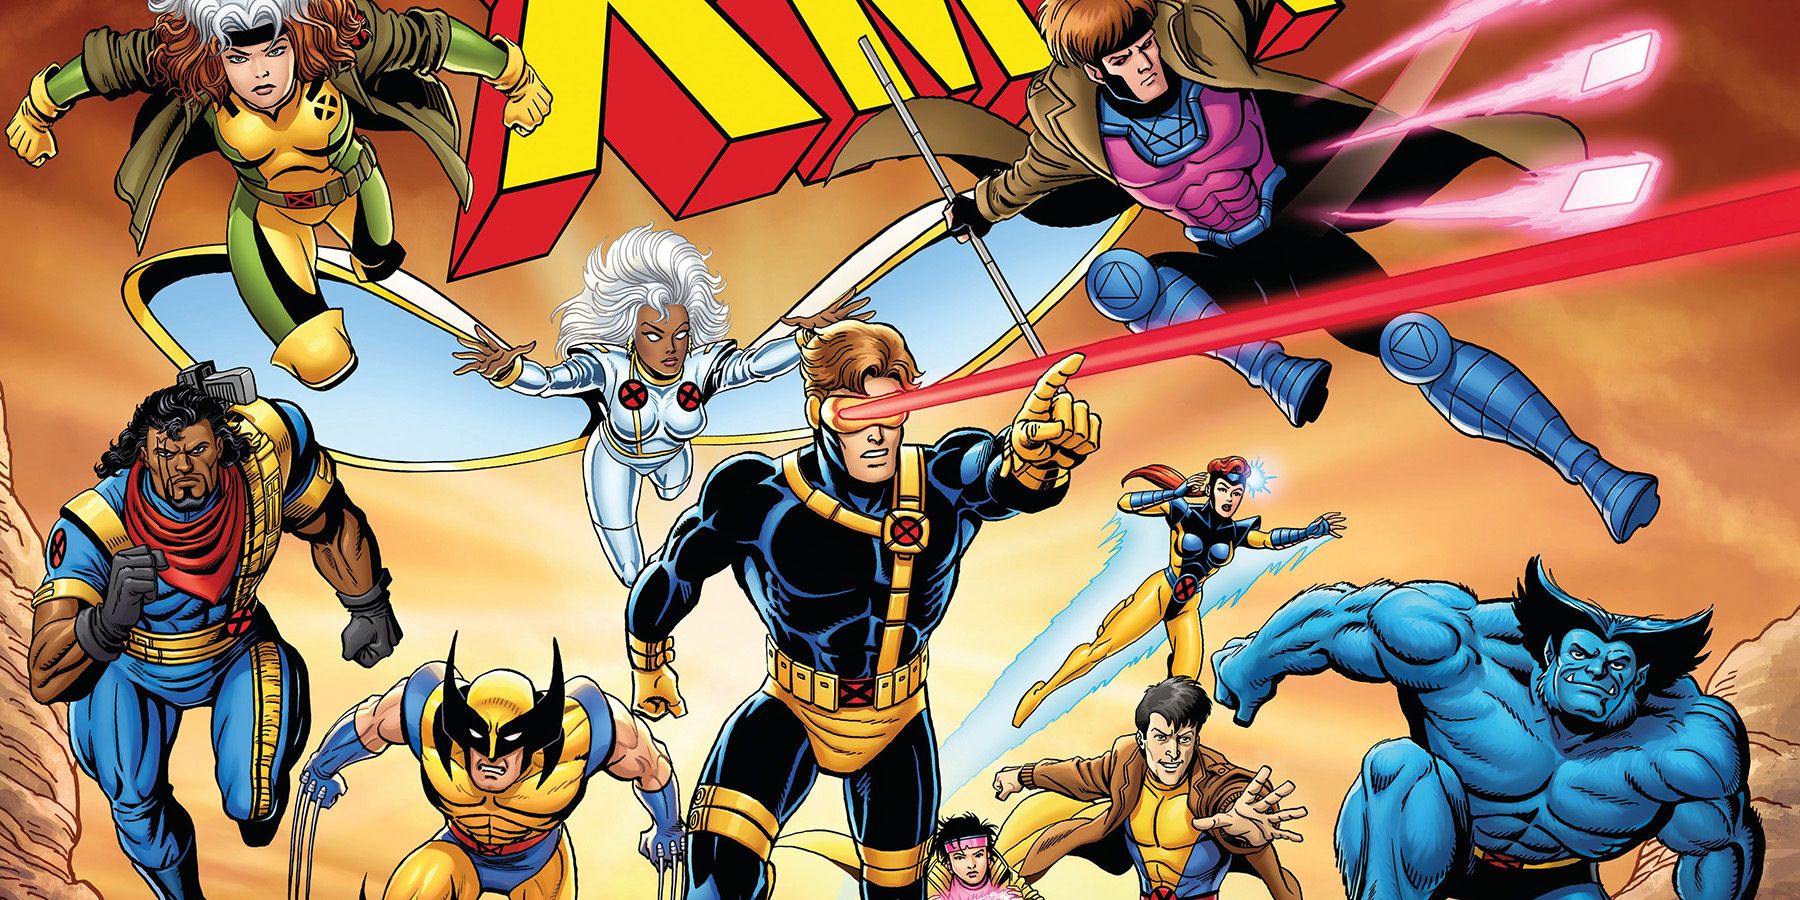 Manga X-Men 97 Images Reveal First Look At Classic Team & Villains 🍀